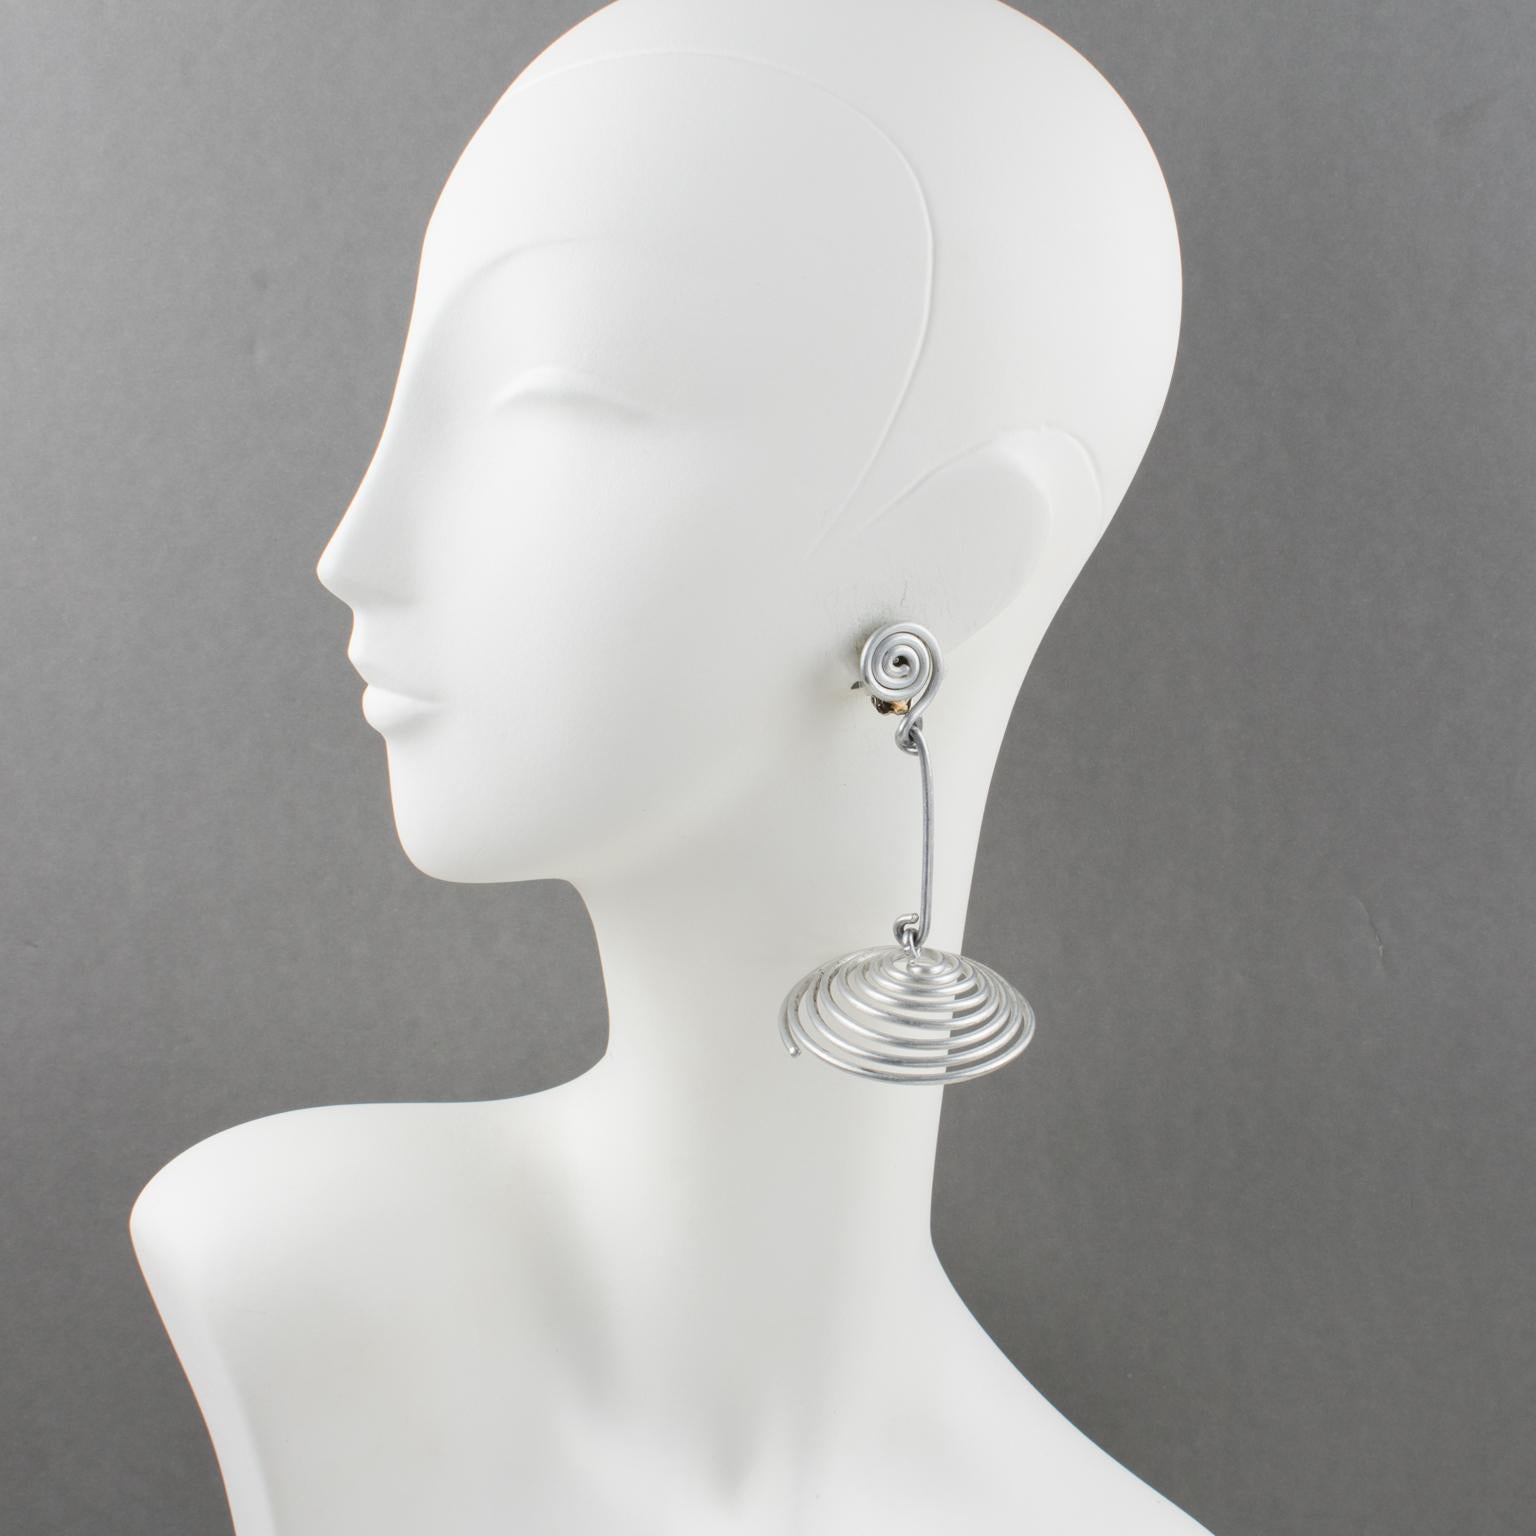 Striking modernist David Spada New York oversized clip-on earrings. Featuring a cool Space Age 1980s design with a dangling articulated flat umbrella spiral coiled shape. Silver color anodized aluminum metal. Unsigned, but we have a similar set of